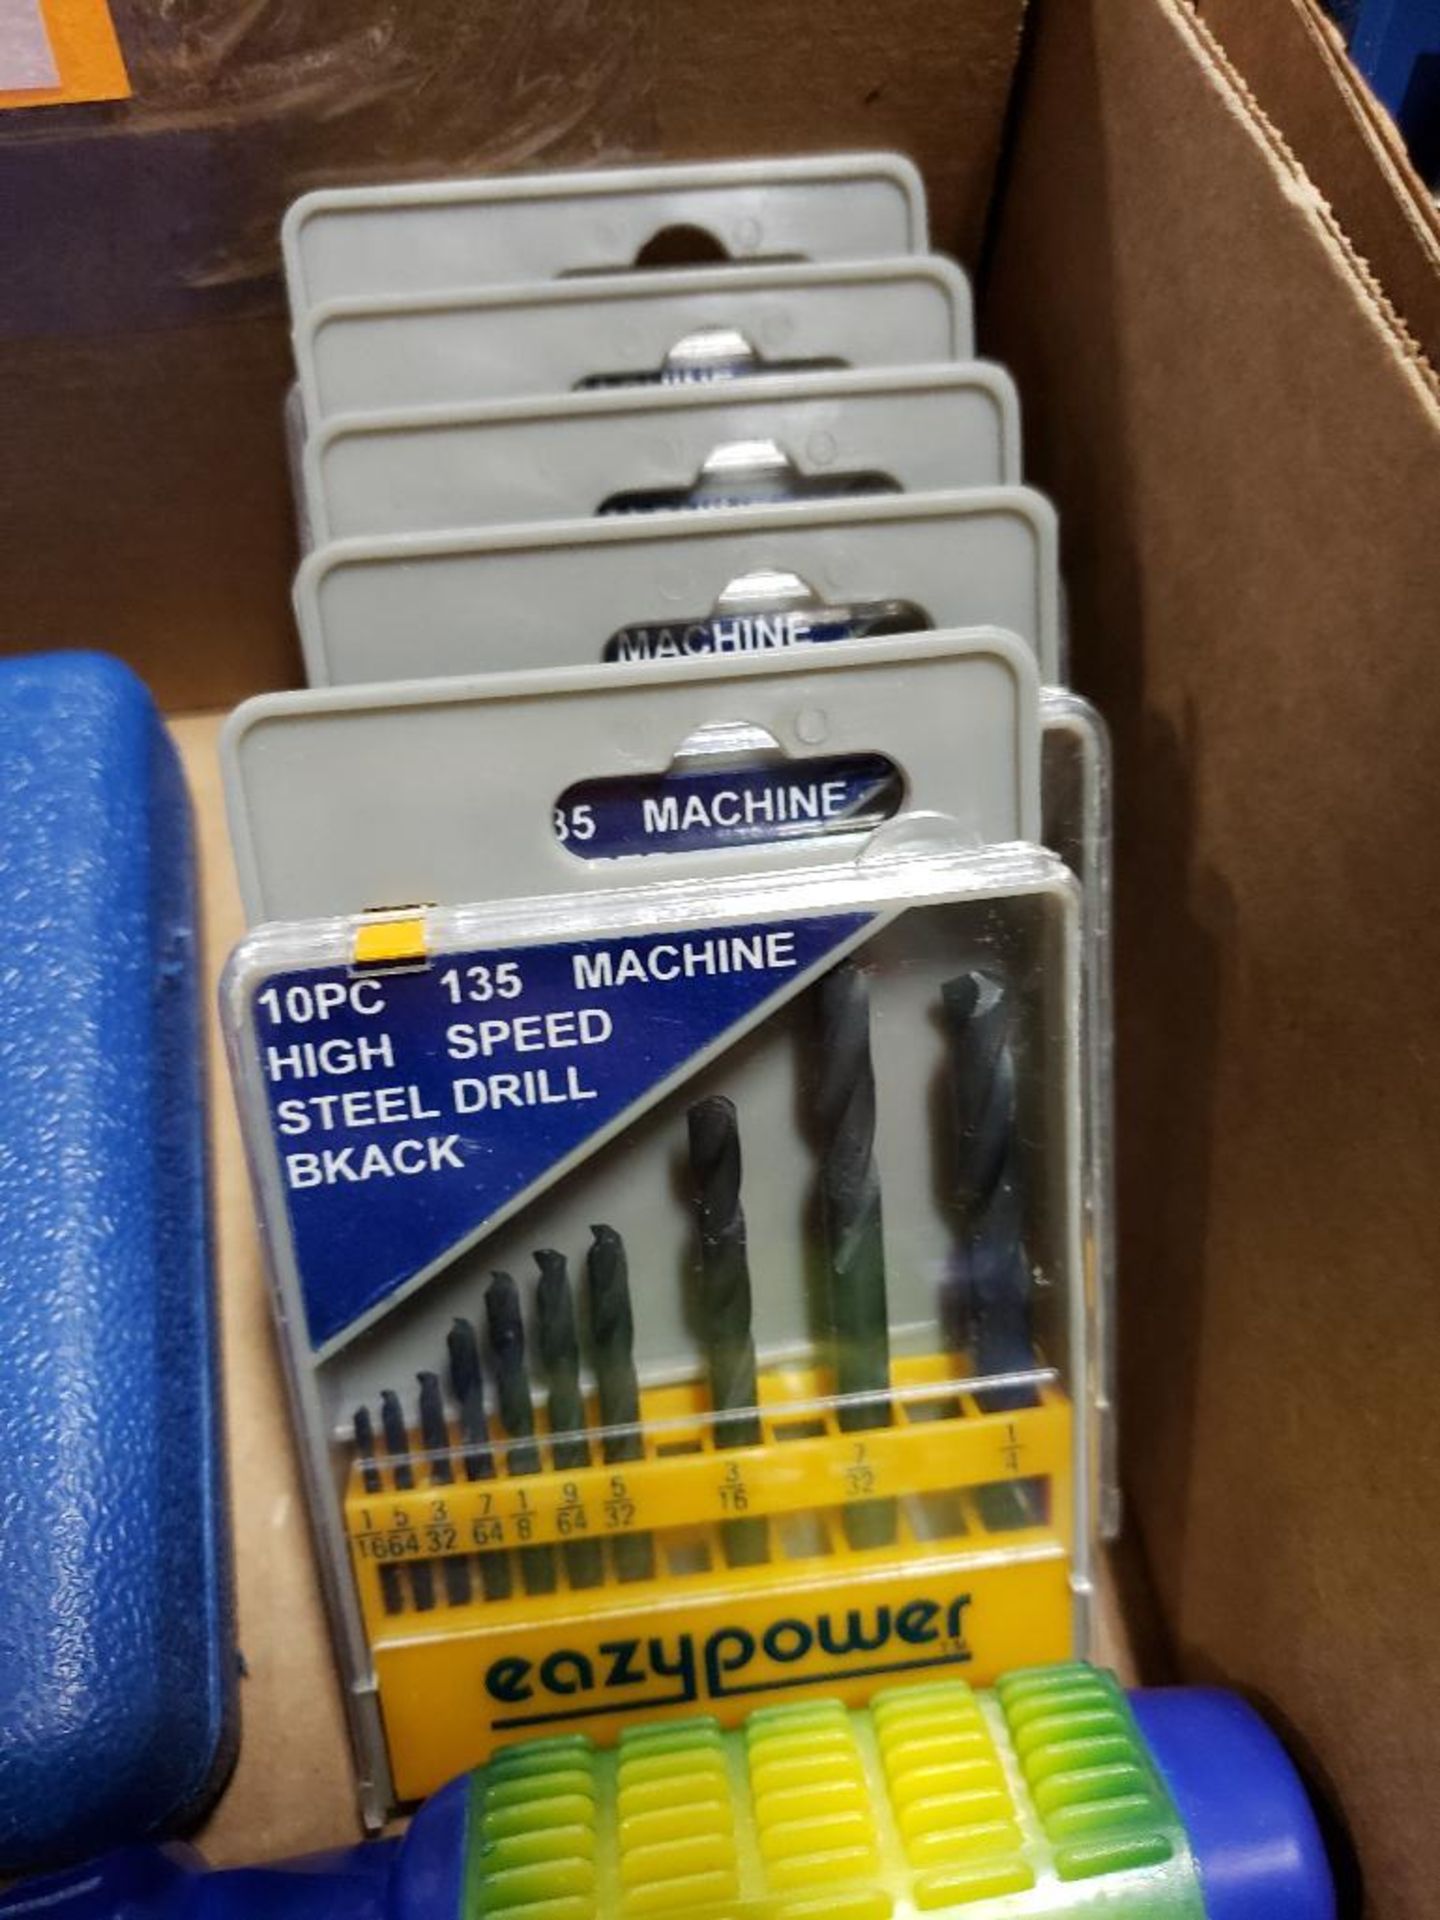 Large assortment of drill bit, screw driver, and bit sets. New as pictured. - Image 2 of 5